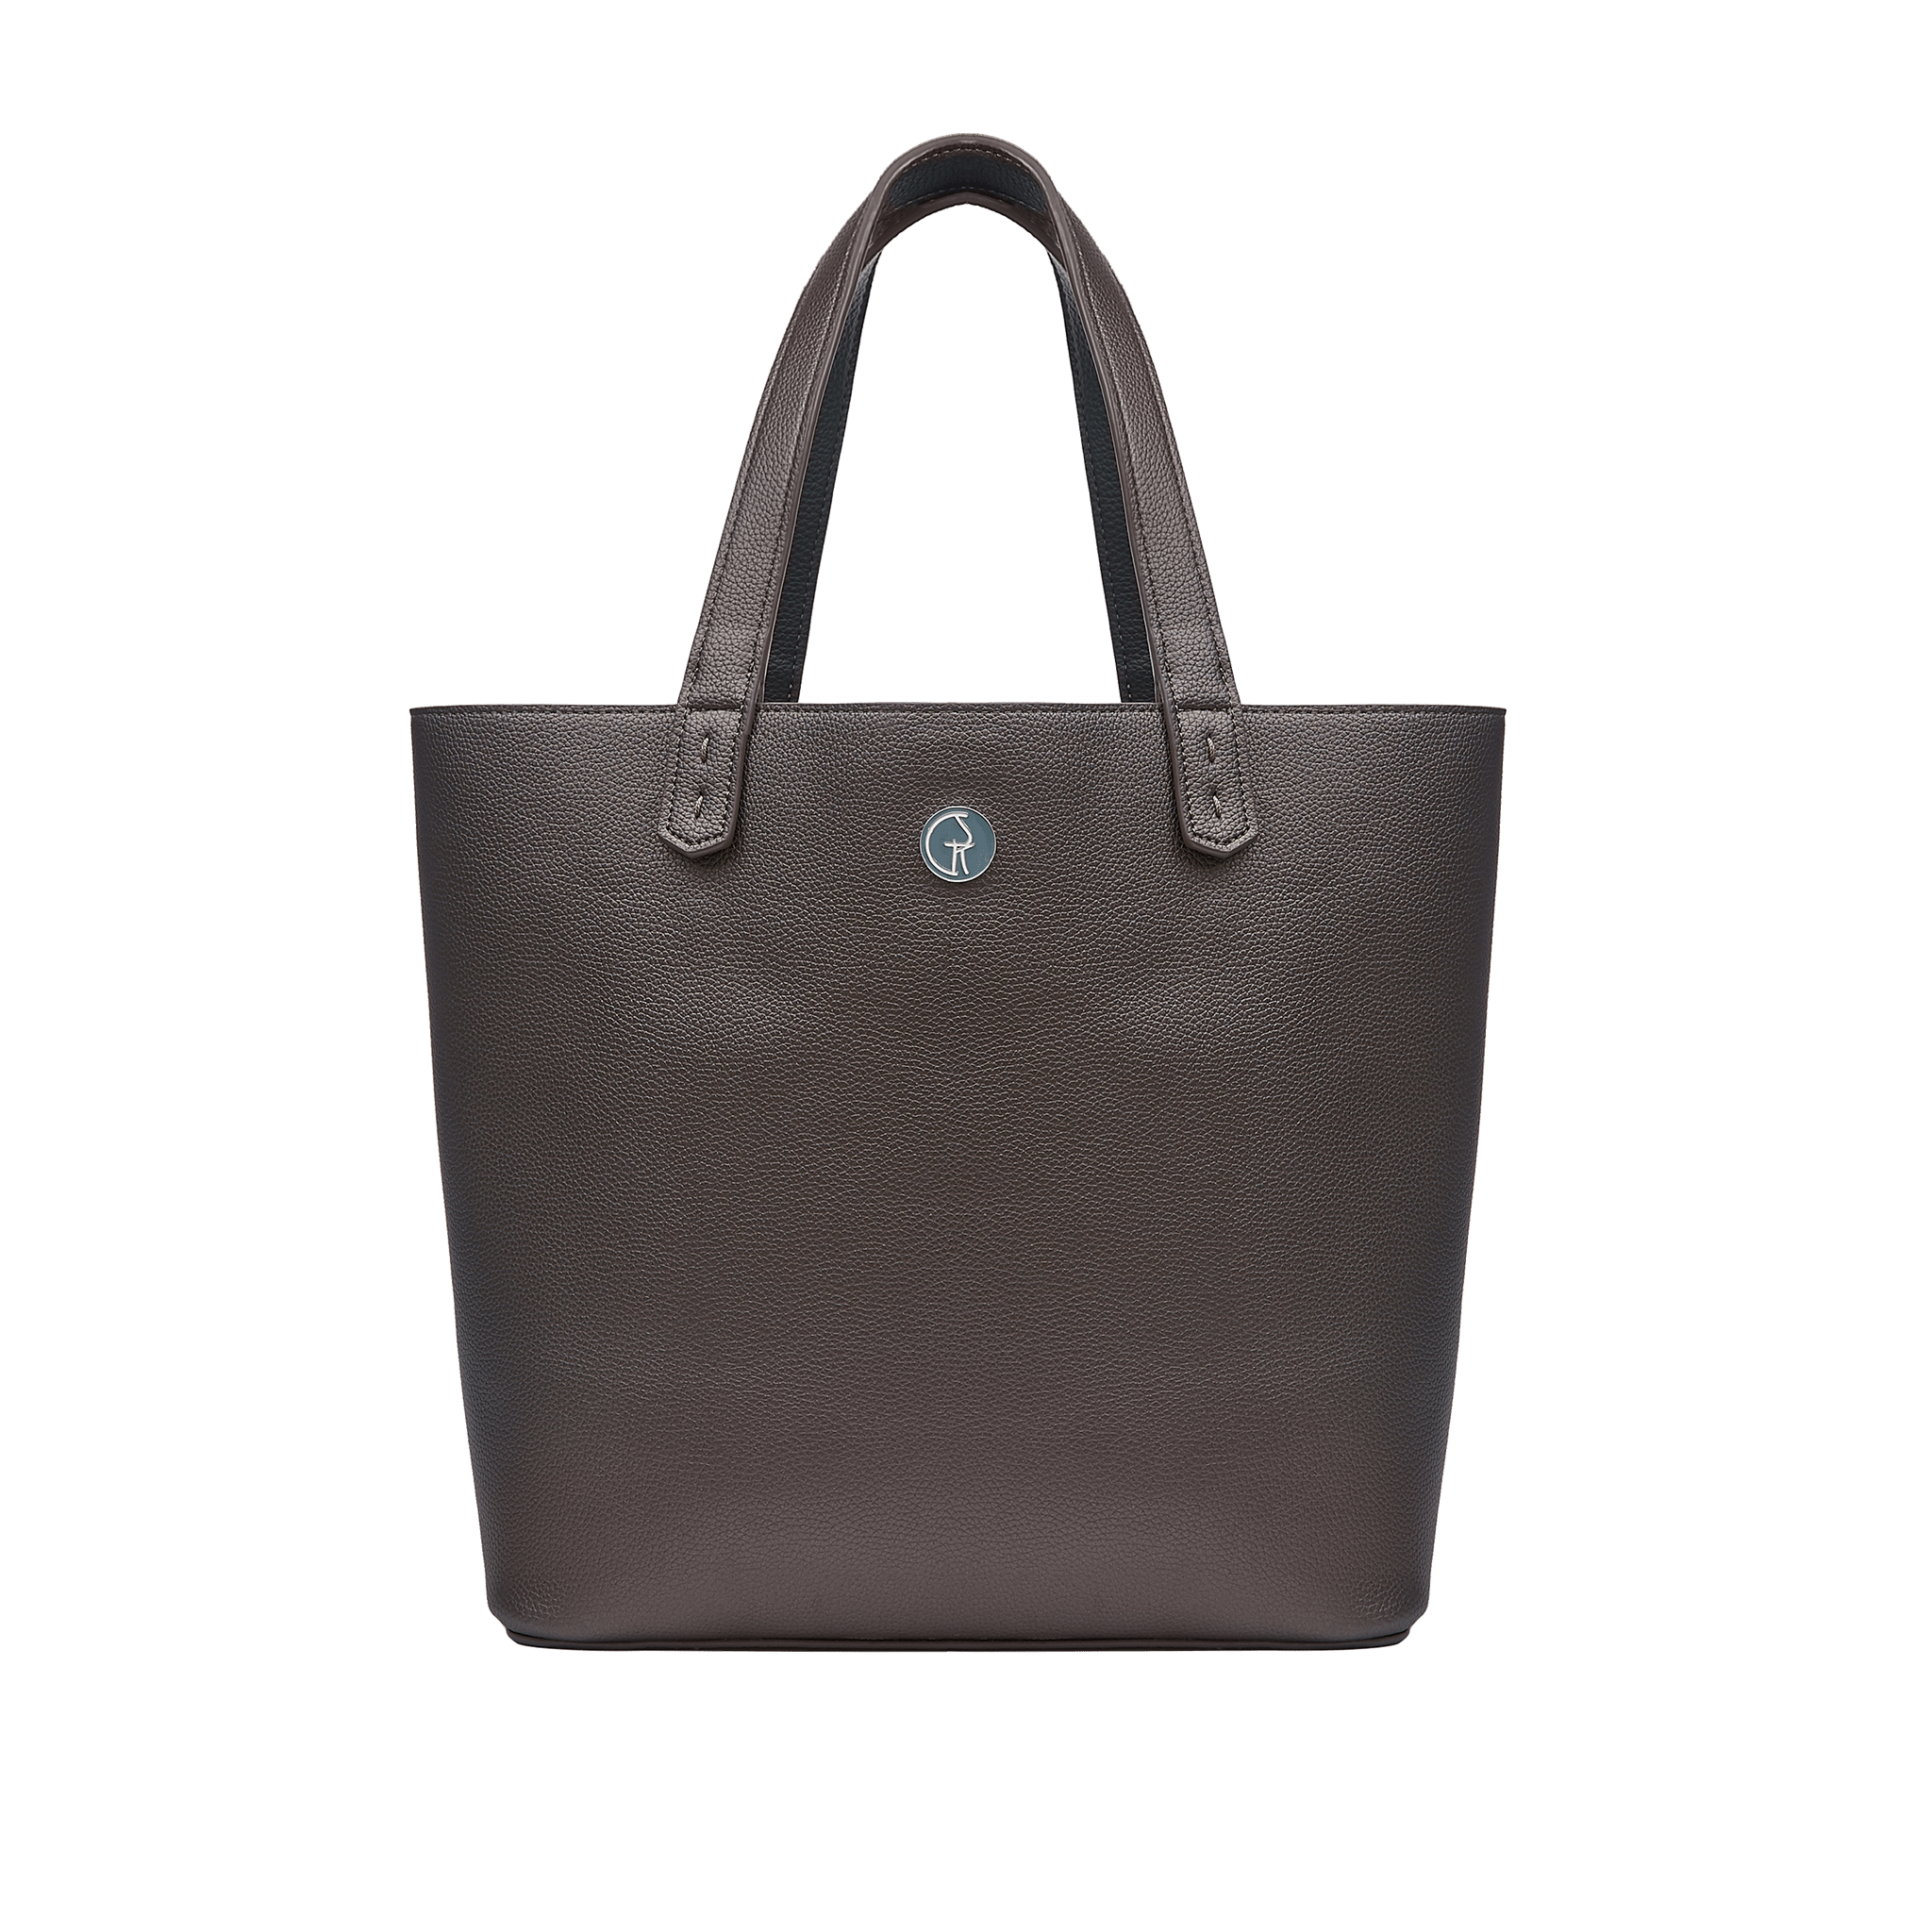 3 Vegan Leather Bags in 1 | Forest Green & Metallic – Immaculate Vegan